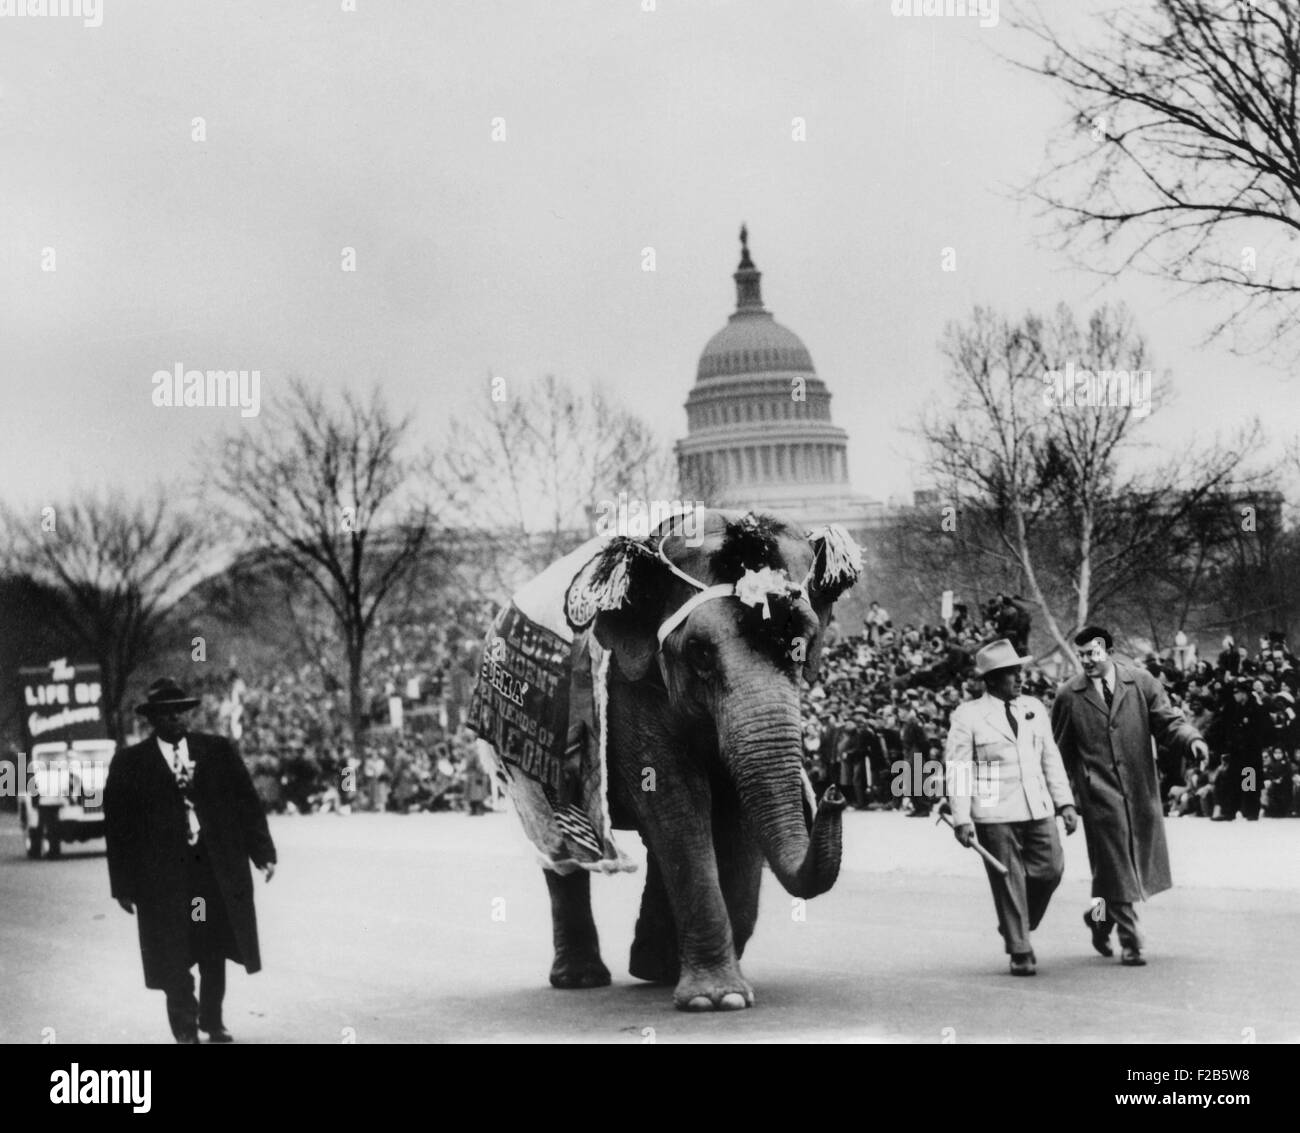 Elephant marching in the Eisenhower Inaugural Parade. Jan. 21, 1957 - (BSLOC 2014 16 37) Stock Photo